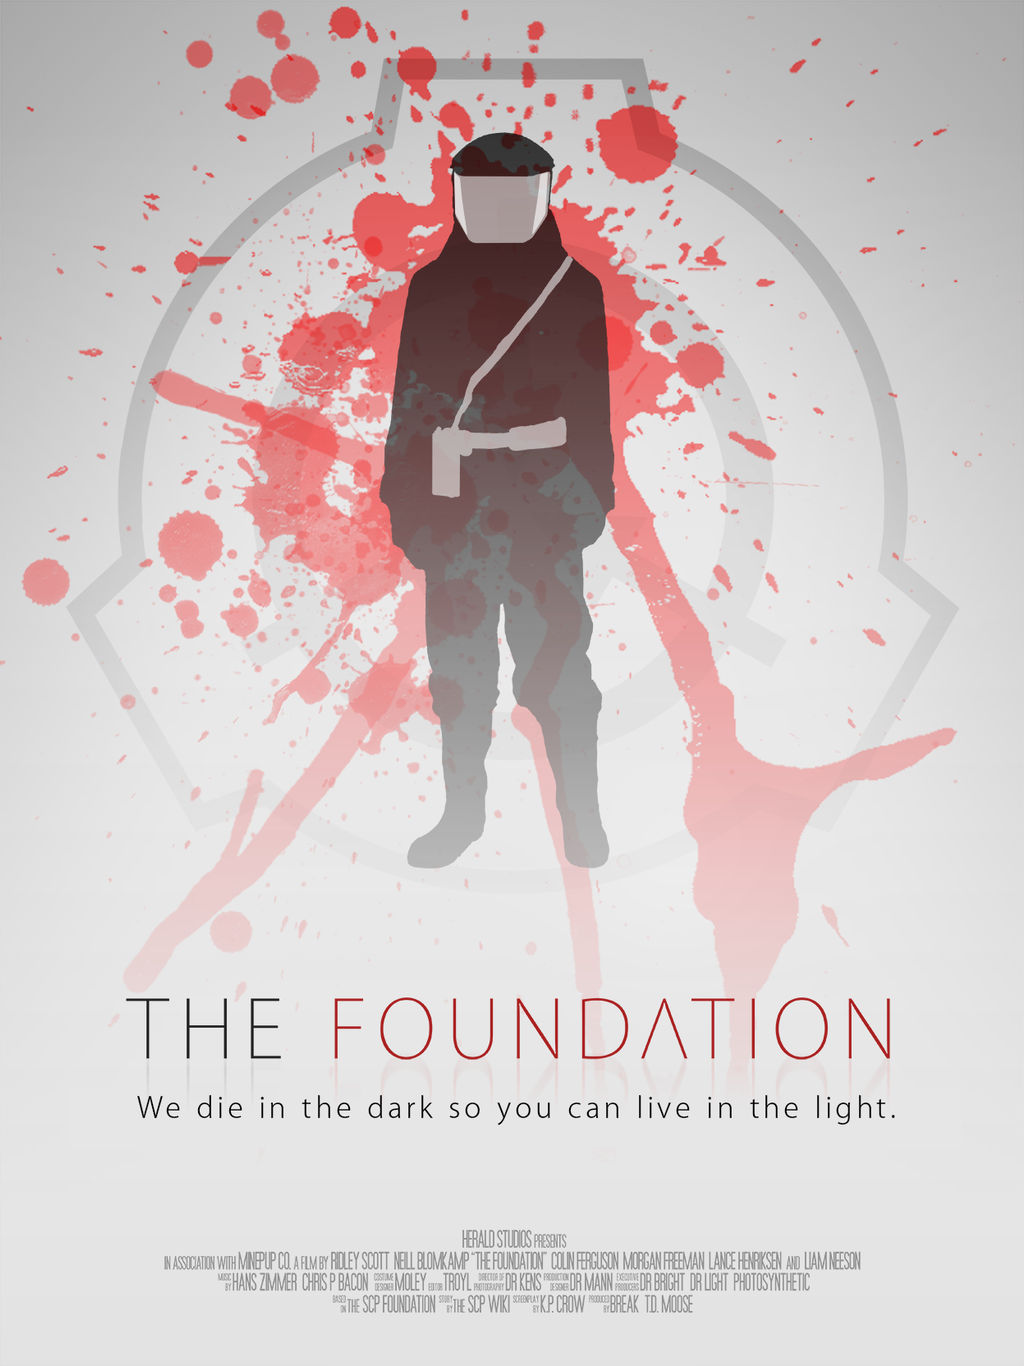 SCP Foundation poster, SCP Foundation